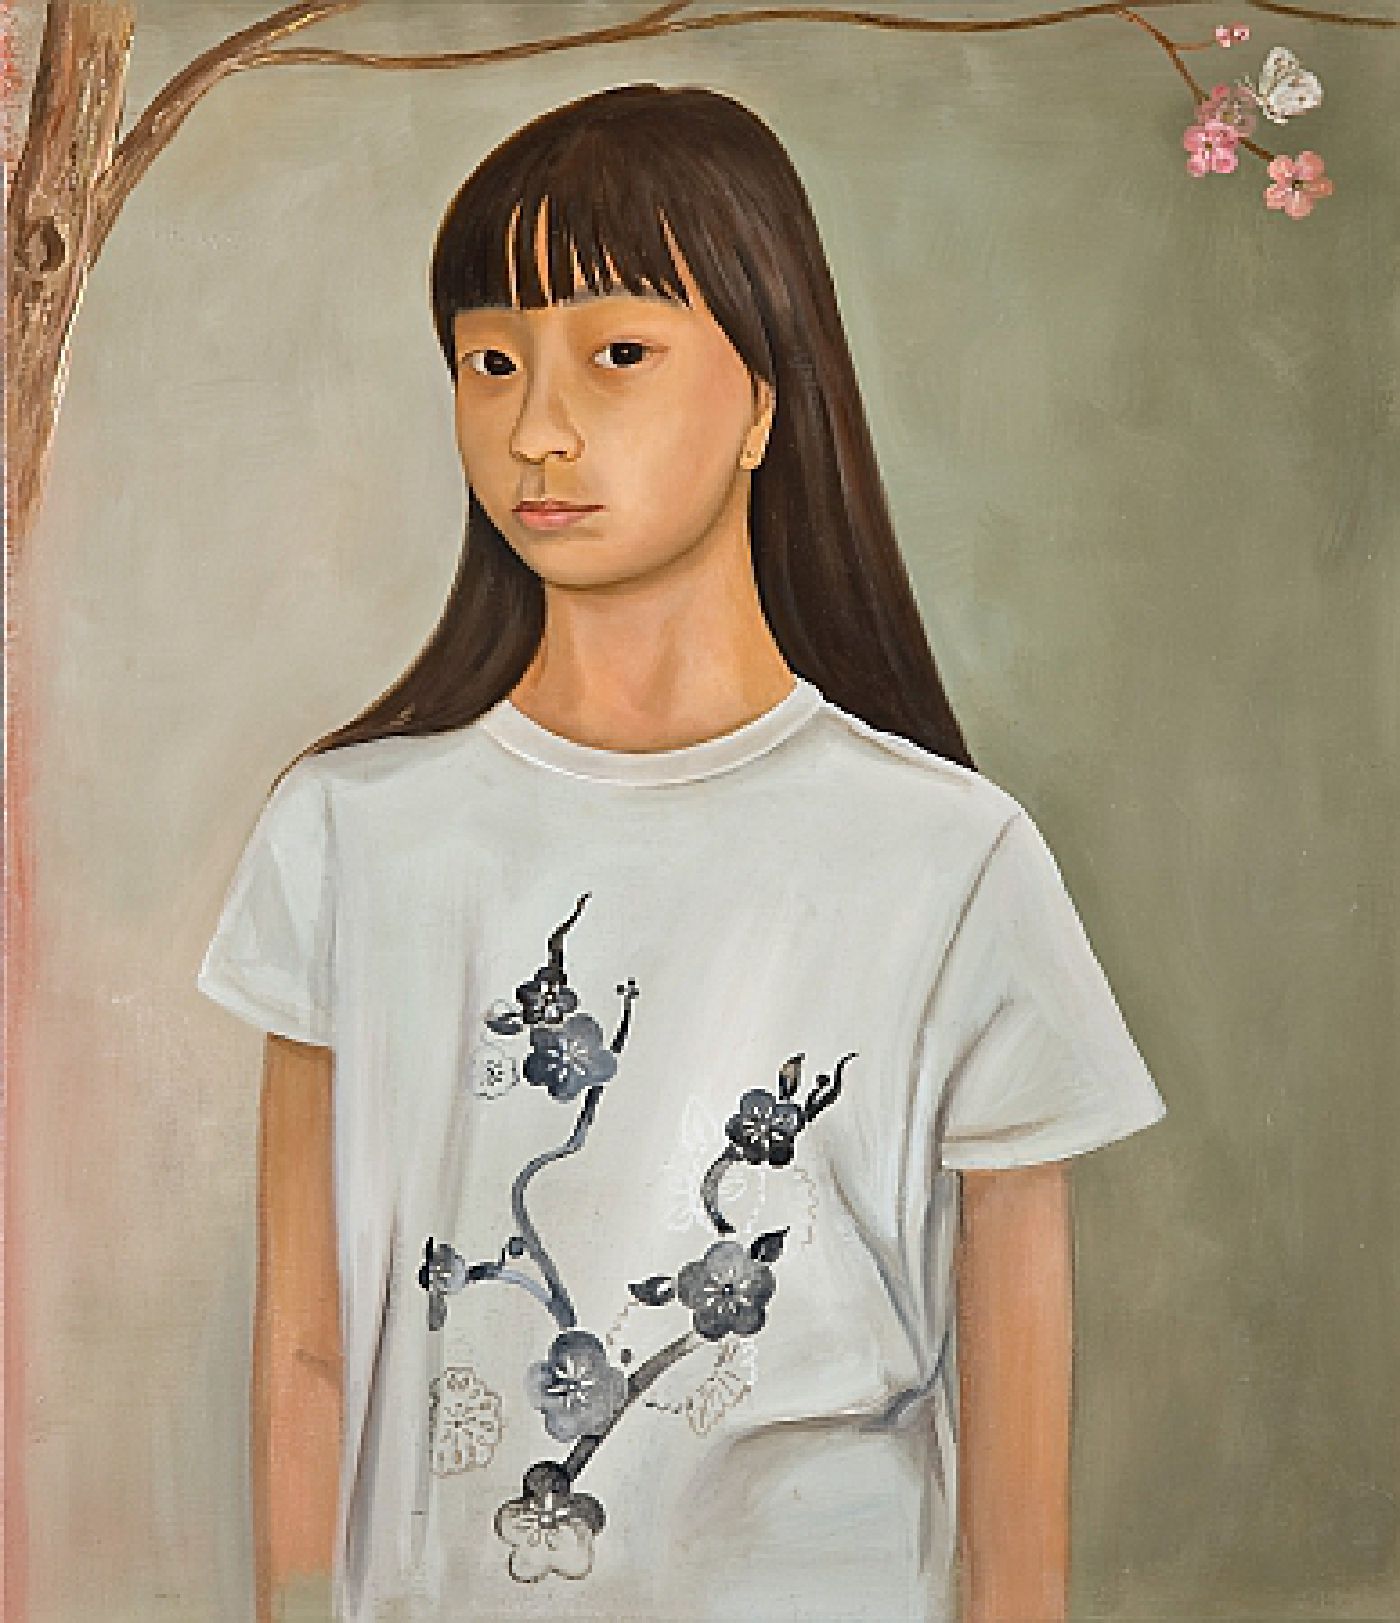 Girl with Cherry Blossom Tee Shirt - oil on linen, 26 inches x 30 inches, 2008